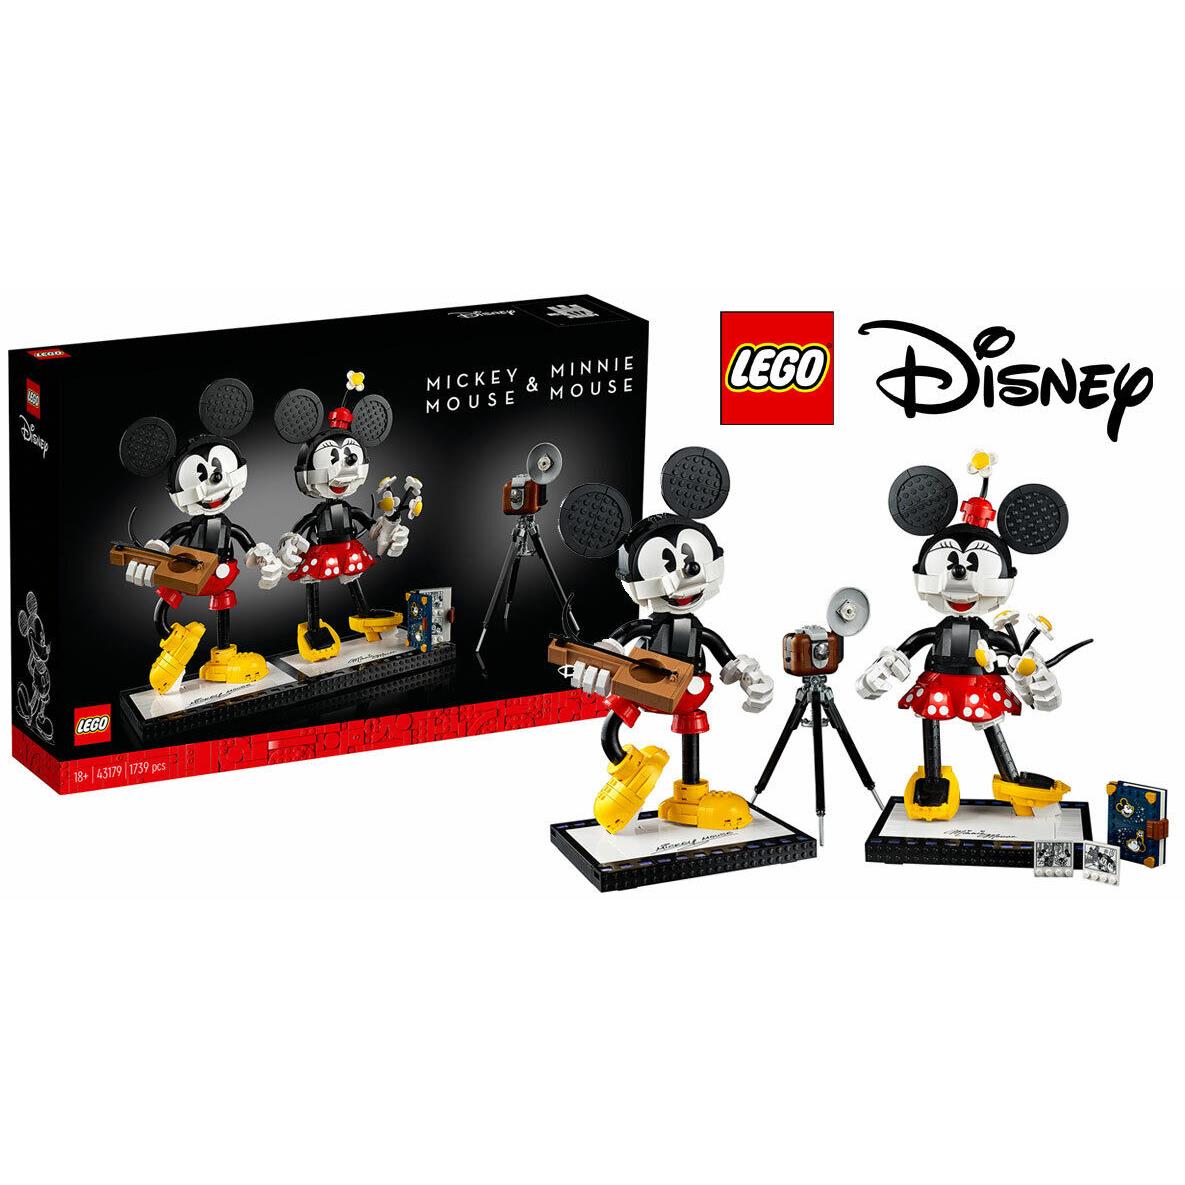 Lego Mickey Mouse and Minnie Mouse Buildable Set 43179